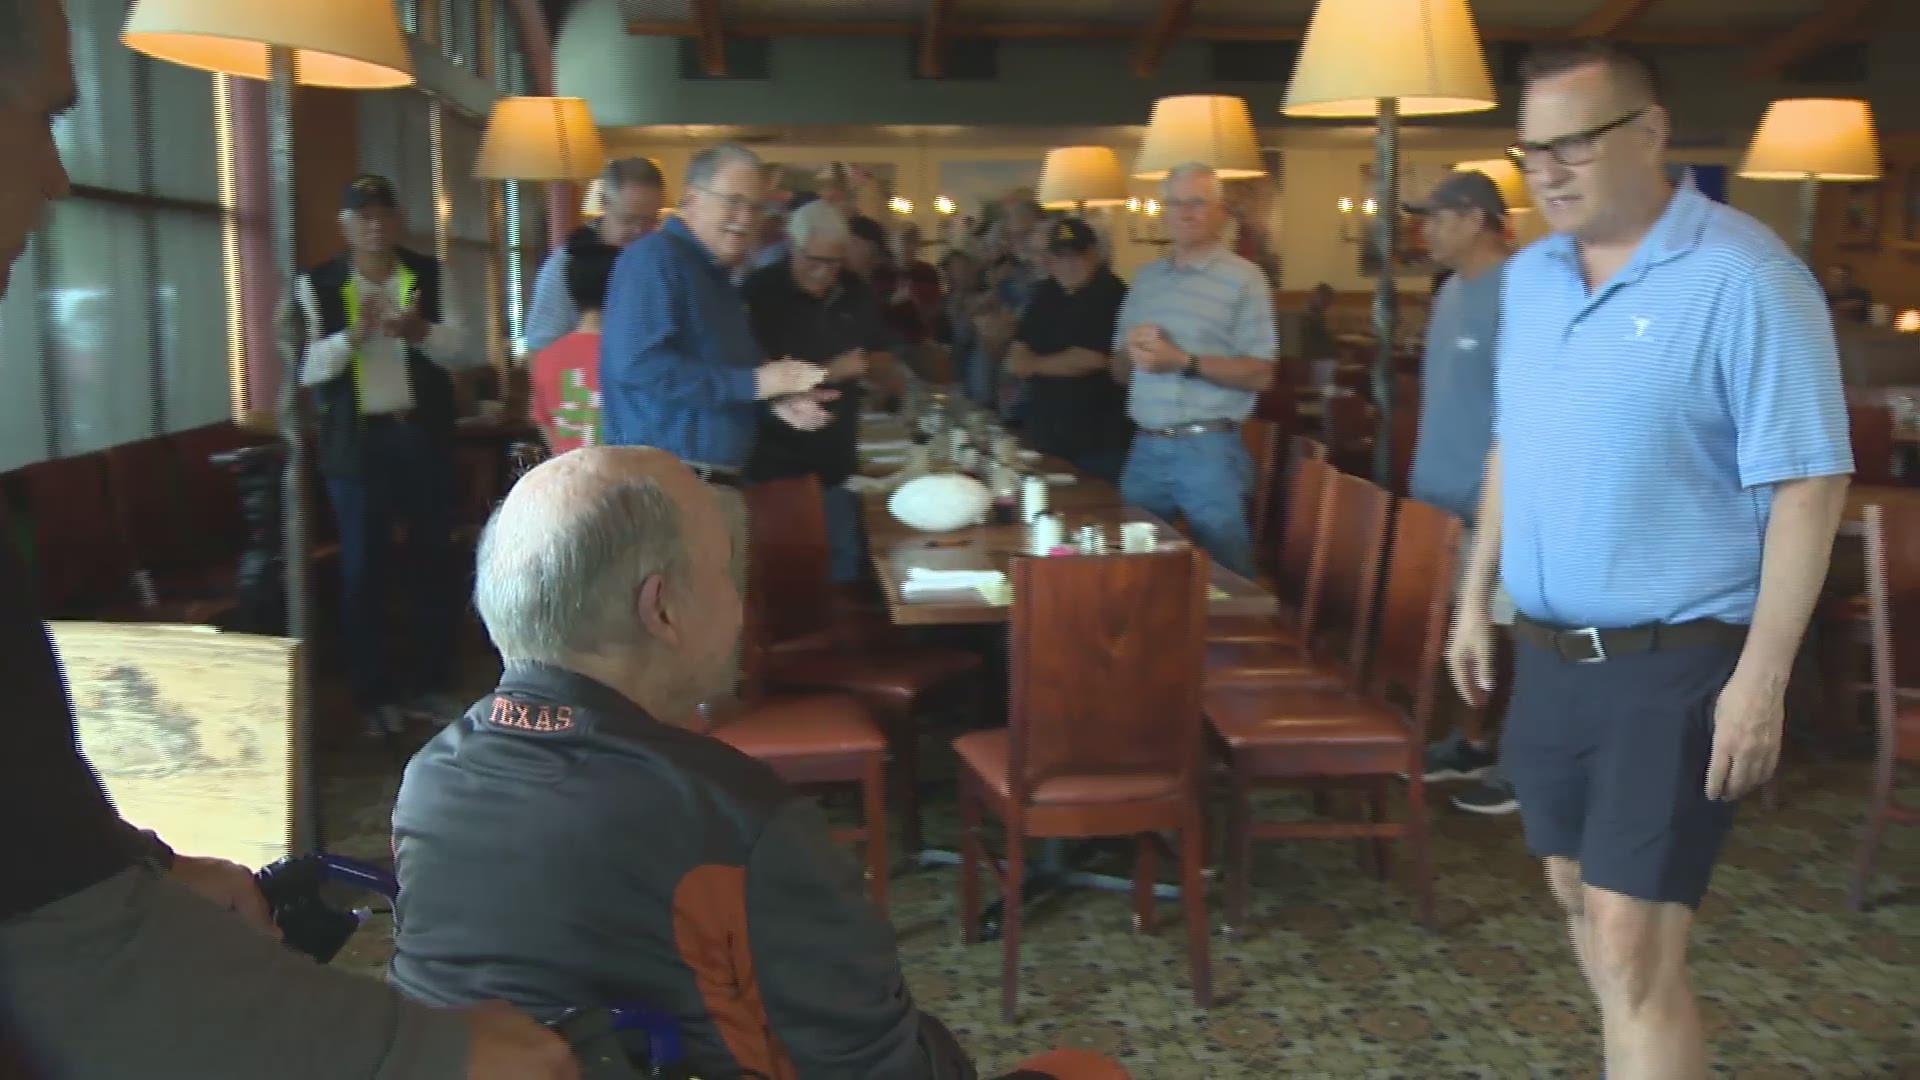 Coach Gus shared Longhorn baseball memories with familiar faces at Maudie's over breakfast.